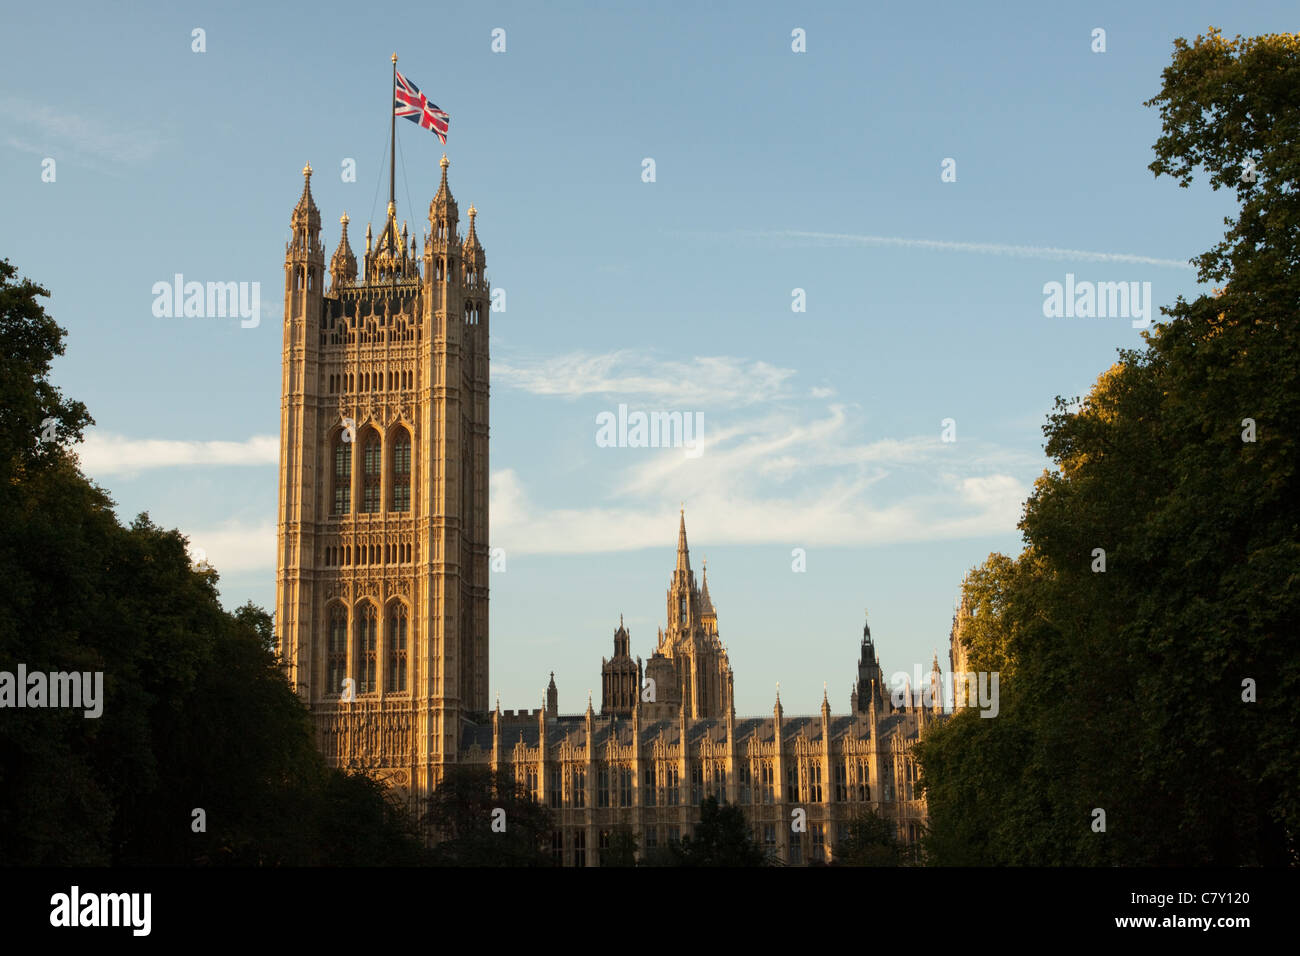 Victoria Tower, Palace of Westminster, London, England, UK Stock Photo